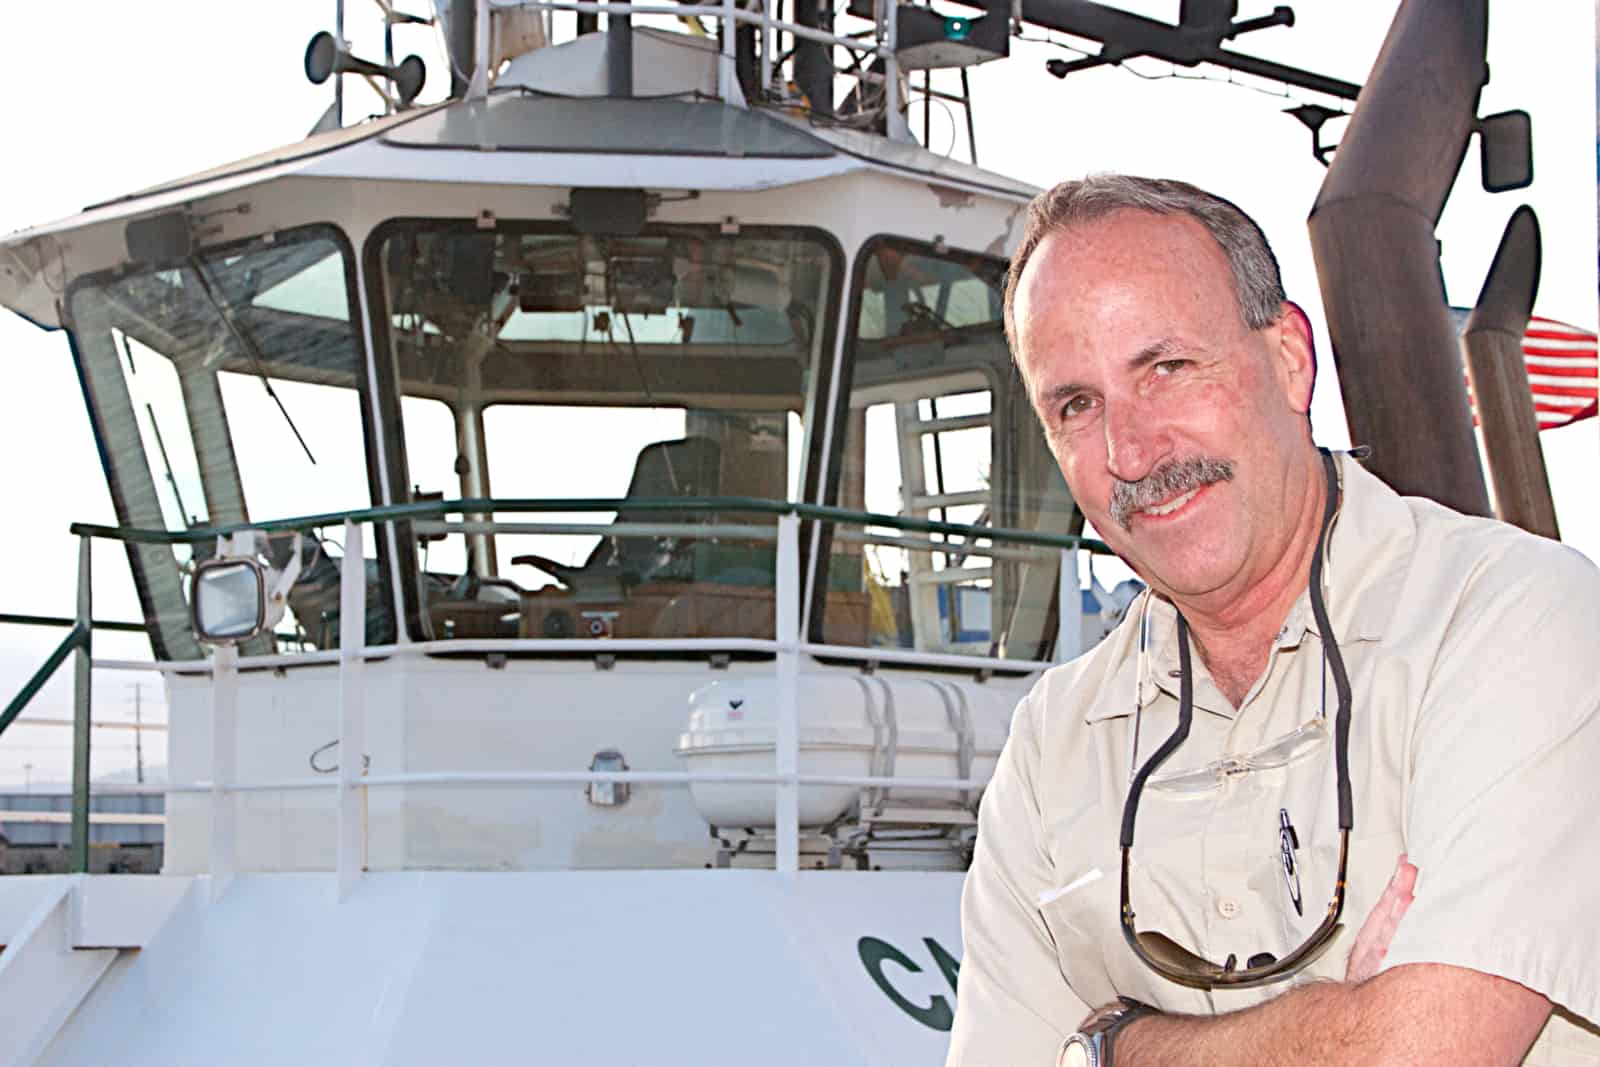 Guy crosses his arms and smiles in front of a Foss tugboat.